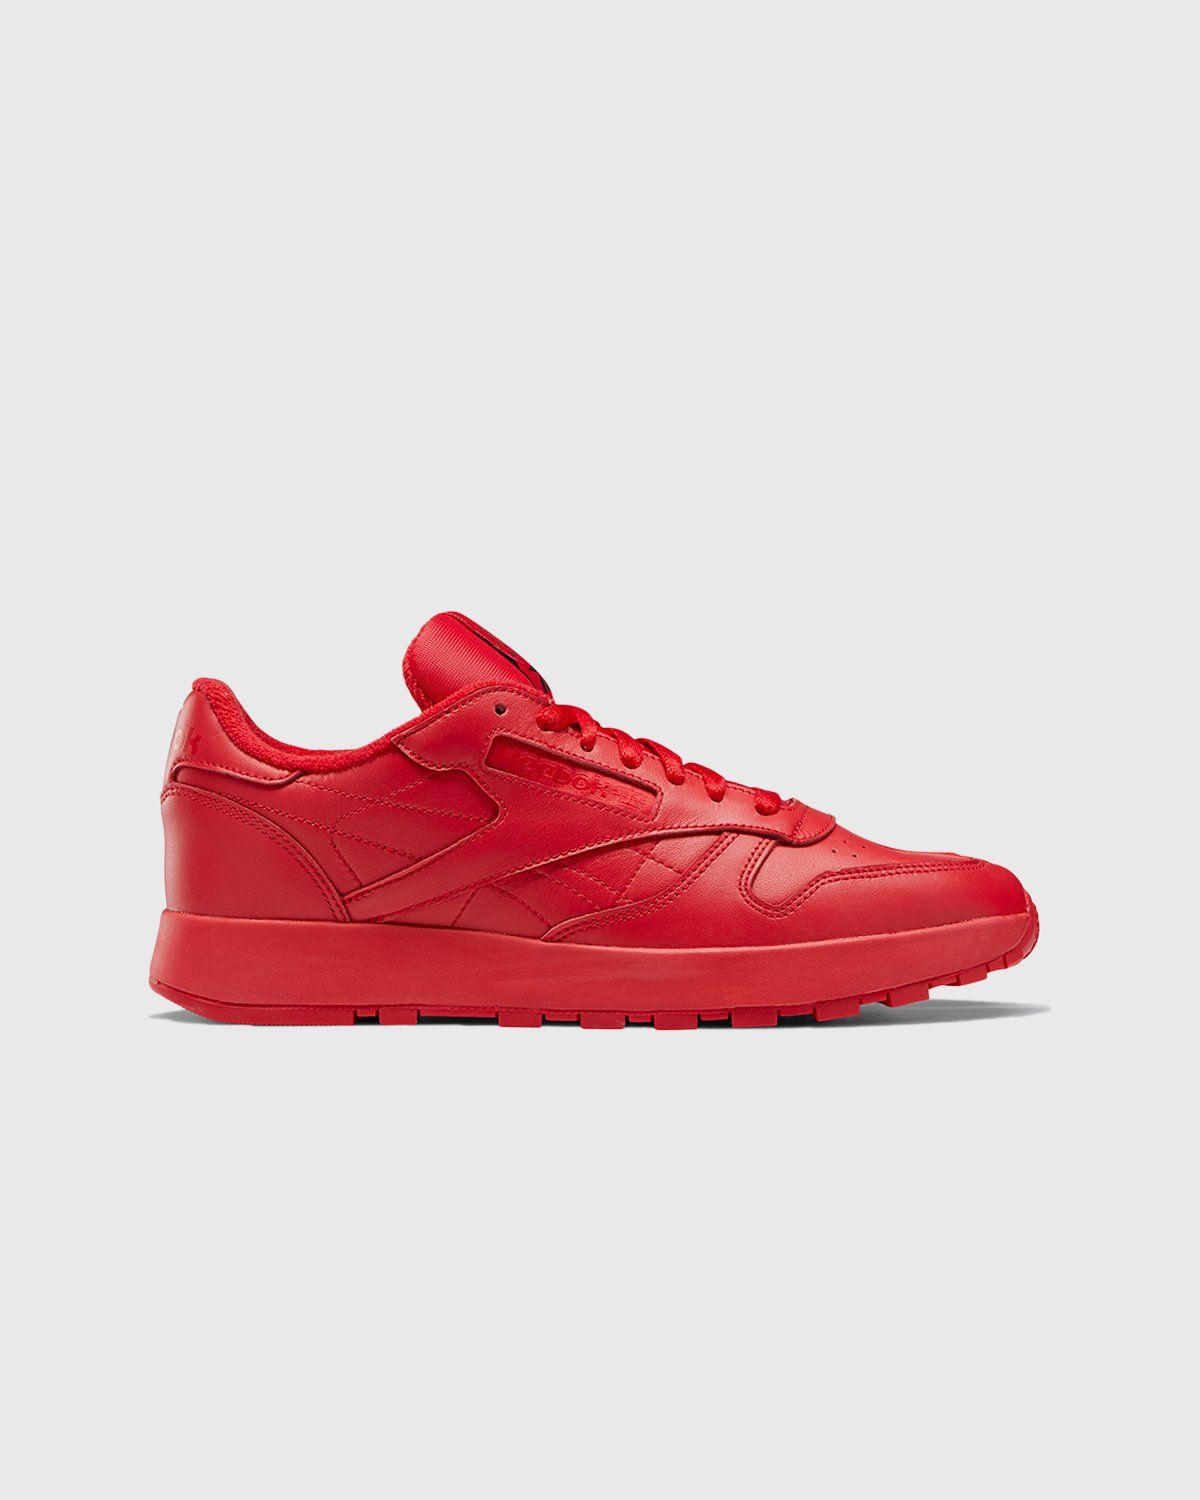 Maison Margiela x Reebok – Classic Leather Tabi Red - Low Top Sneakers - Red - Image 1